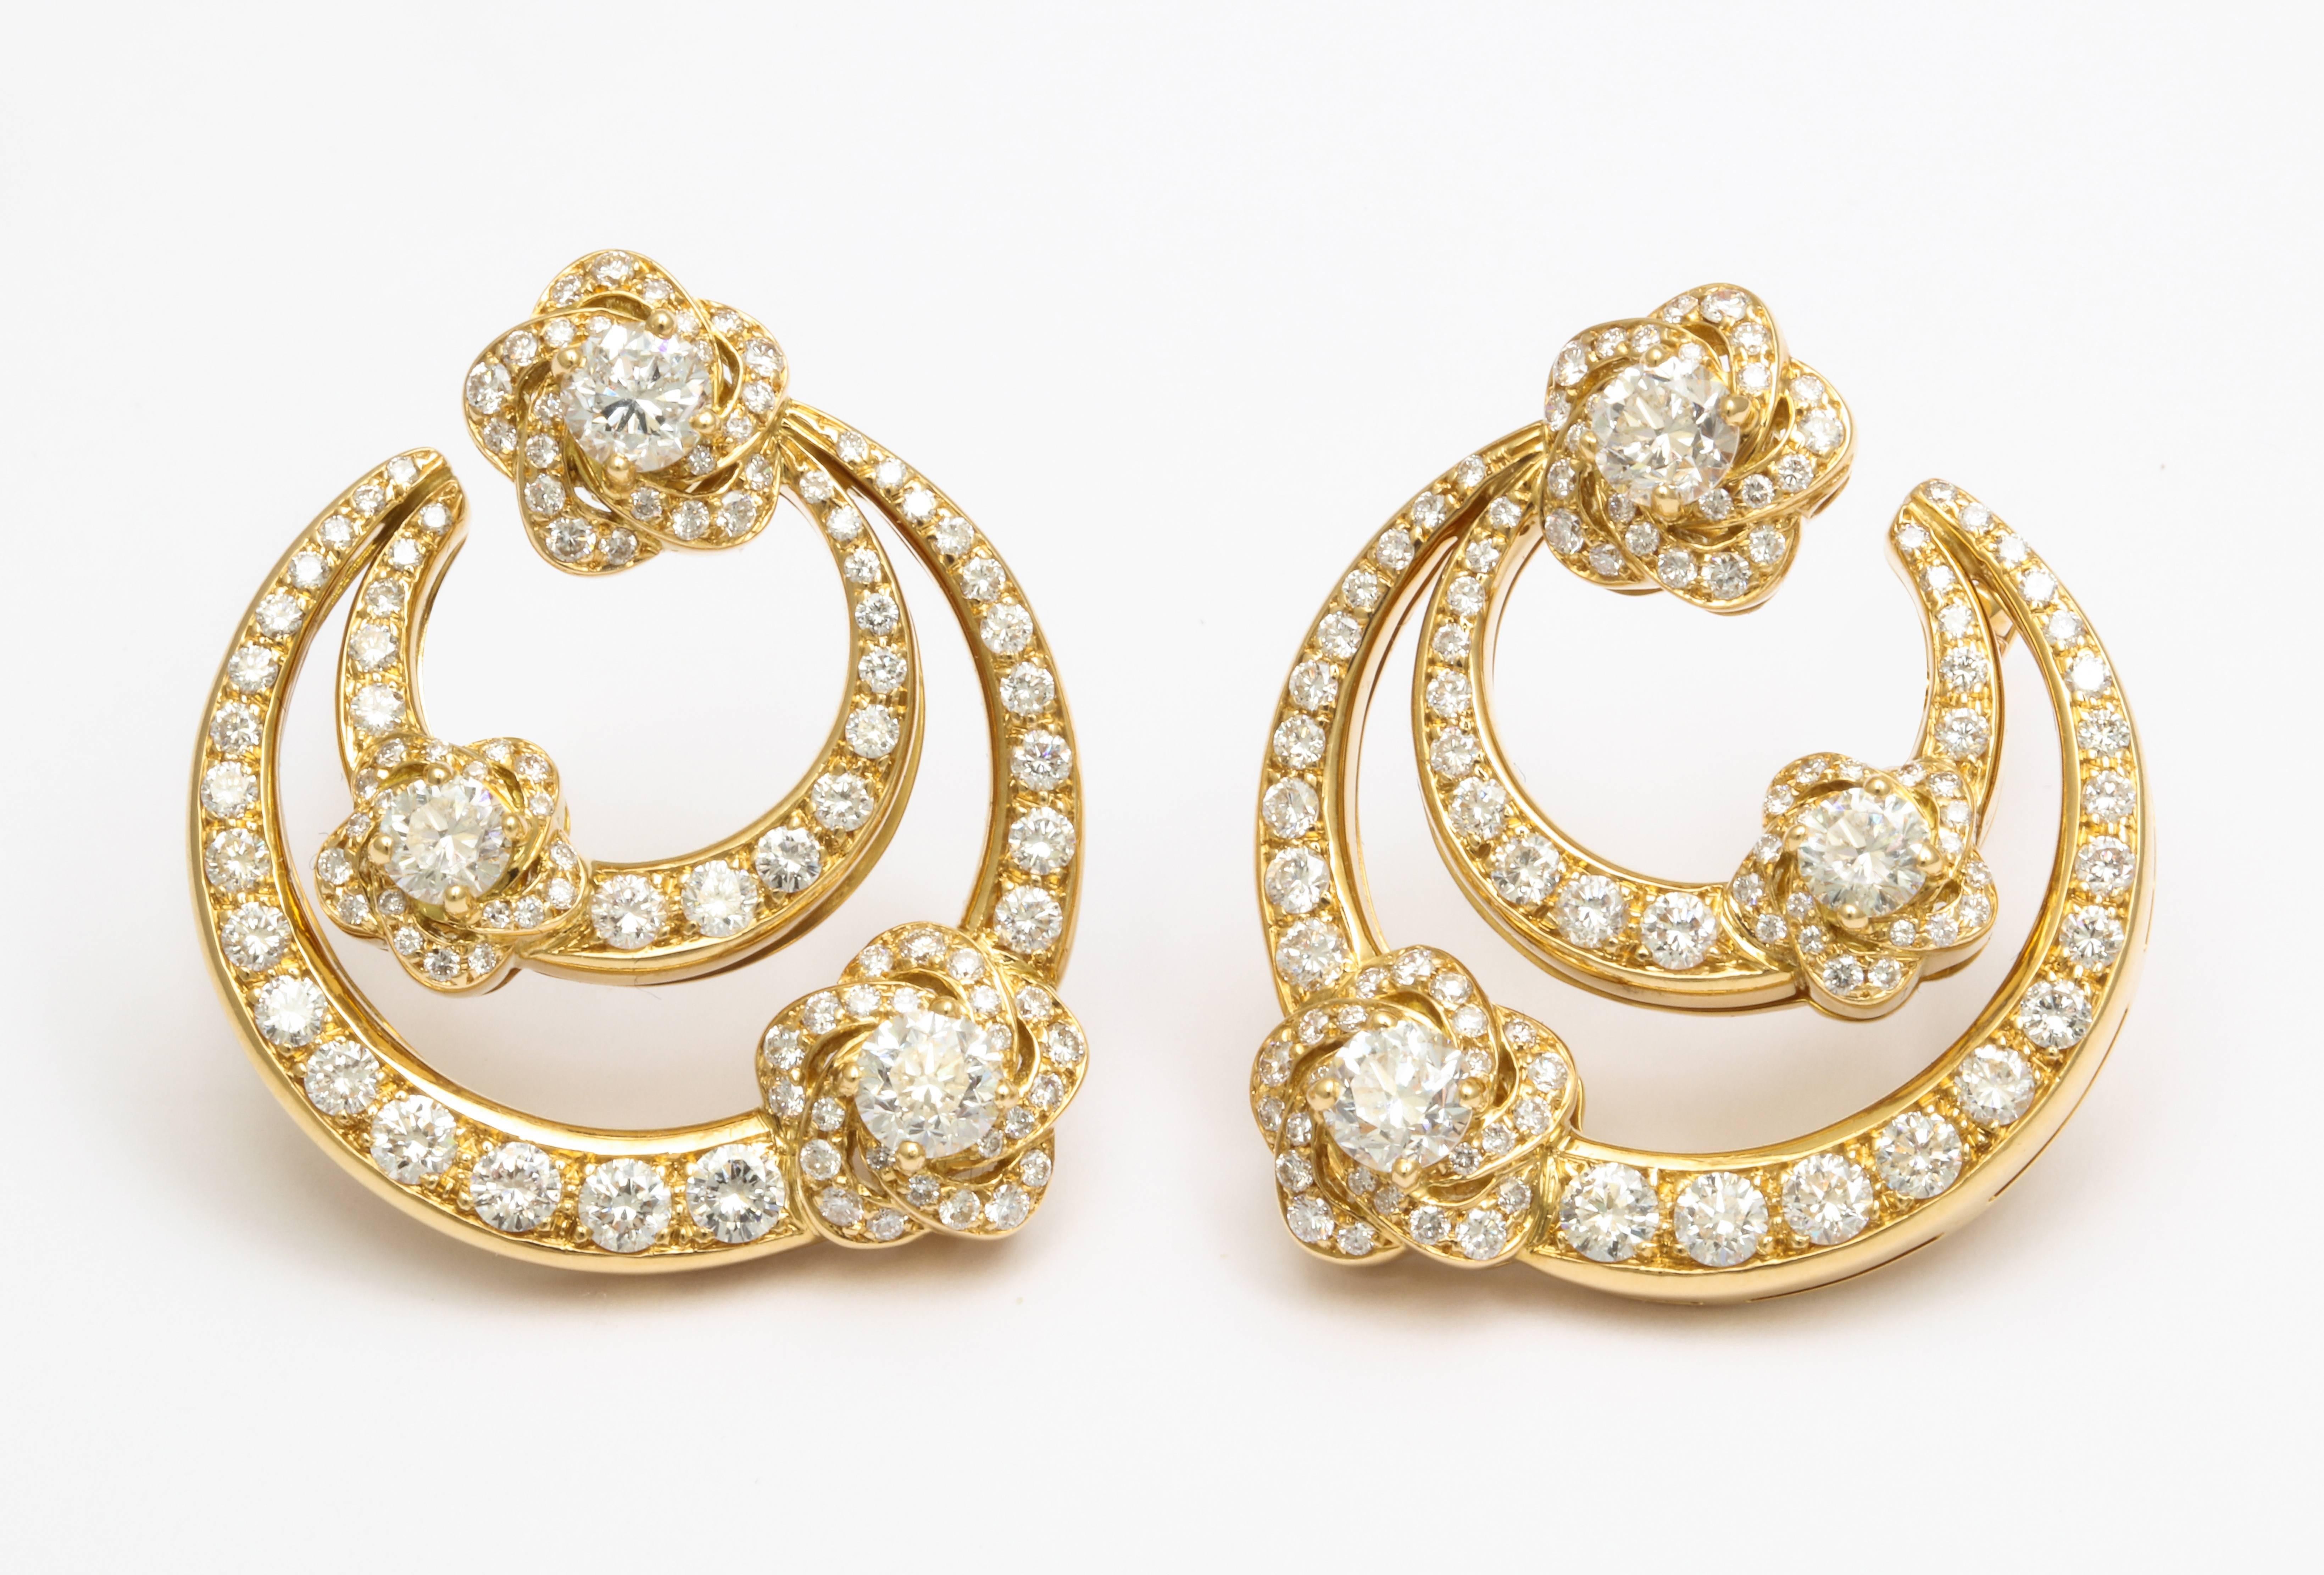 A pair of 18 karat yellow gold earrings, signed Bulgari with a total diamond weight of approximately 6 carats. Circa 1980's. Made in Italy. Instantly recognizable, and a great addition to every woman's collection.